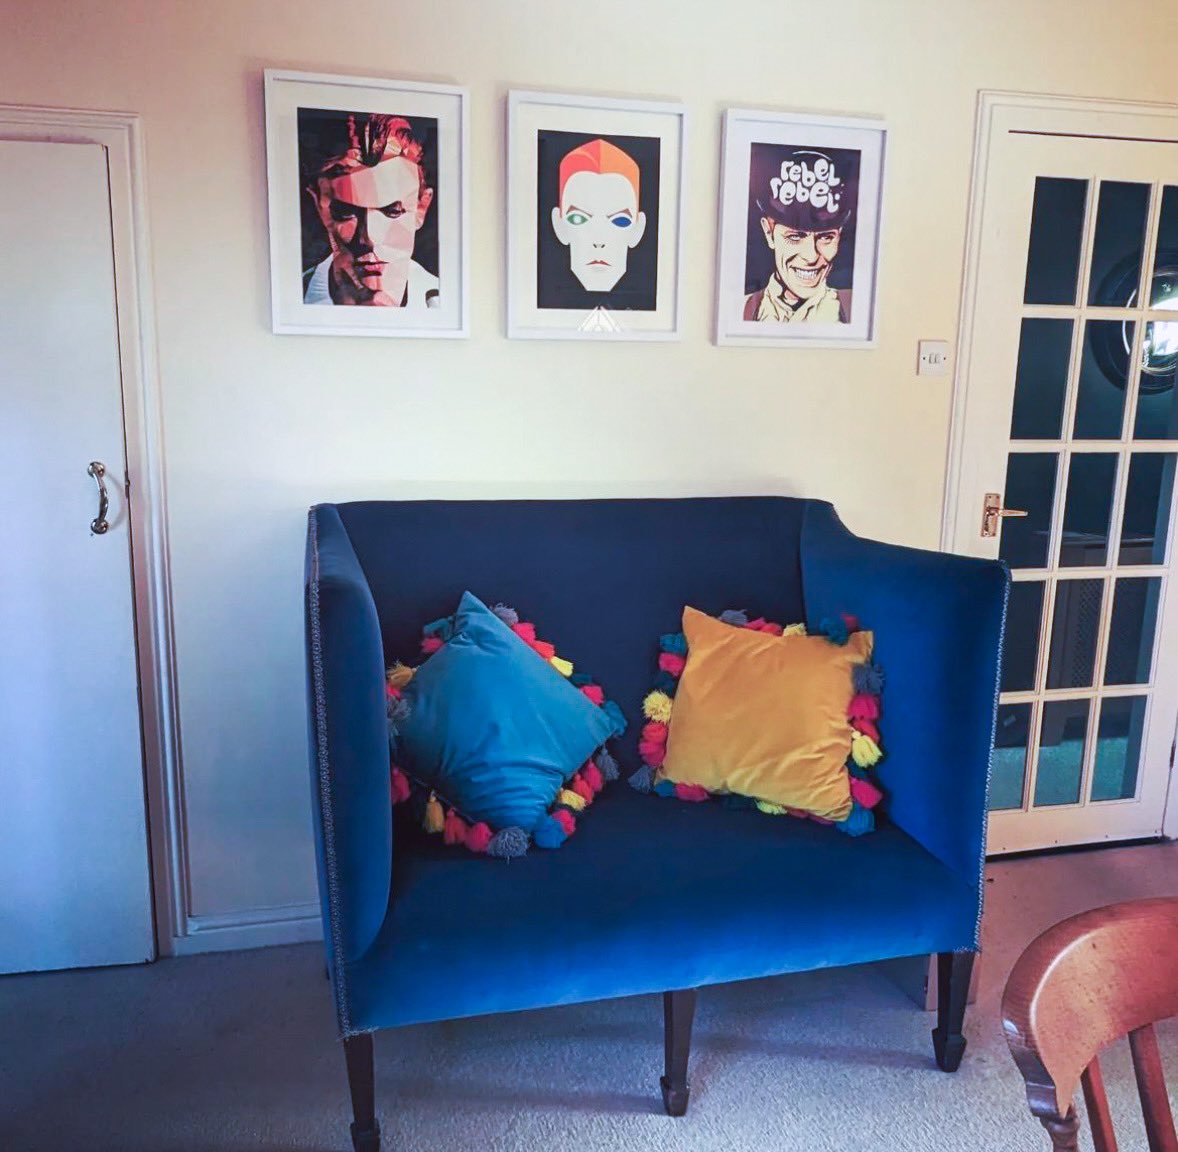 Loving this interior with Bowie by three different artists - me, Stanley Chow and unsure of the third 😍 Nice love seat too 💖
.
#portraitartist #egoistegallery #baibaauria #stanleychow #manchesterartist #interiordesign